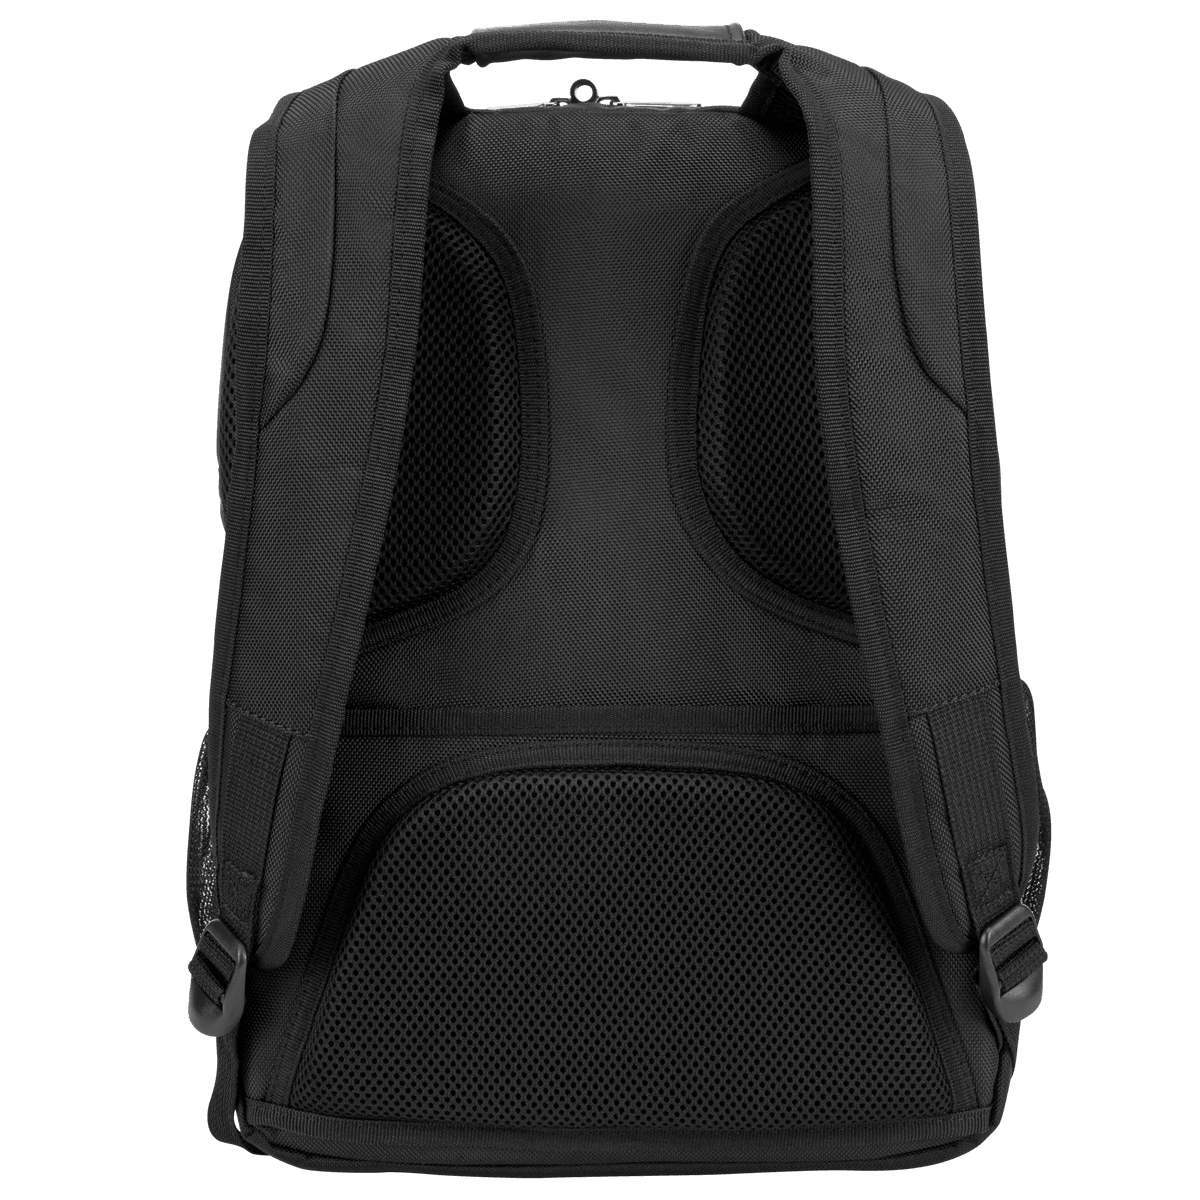 Checkpoint-Friendly Air Traveler 16-inch Laptop Backpack